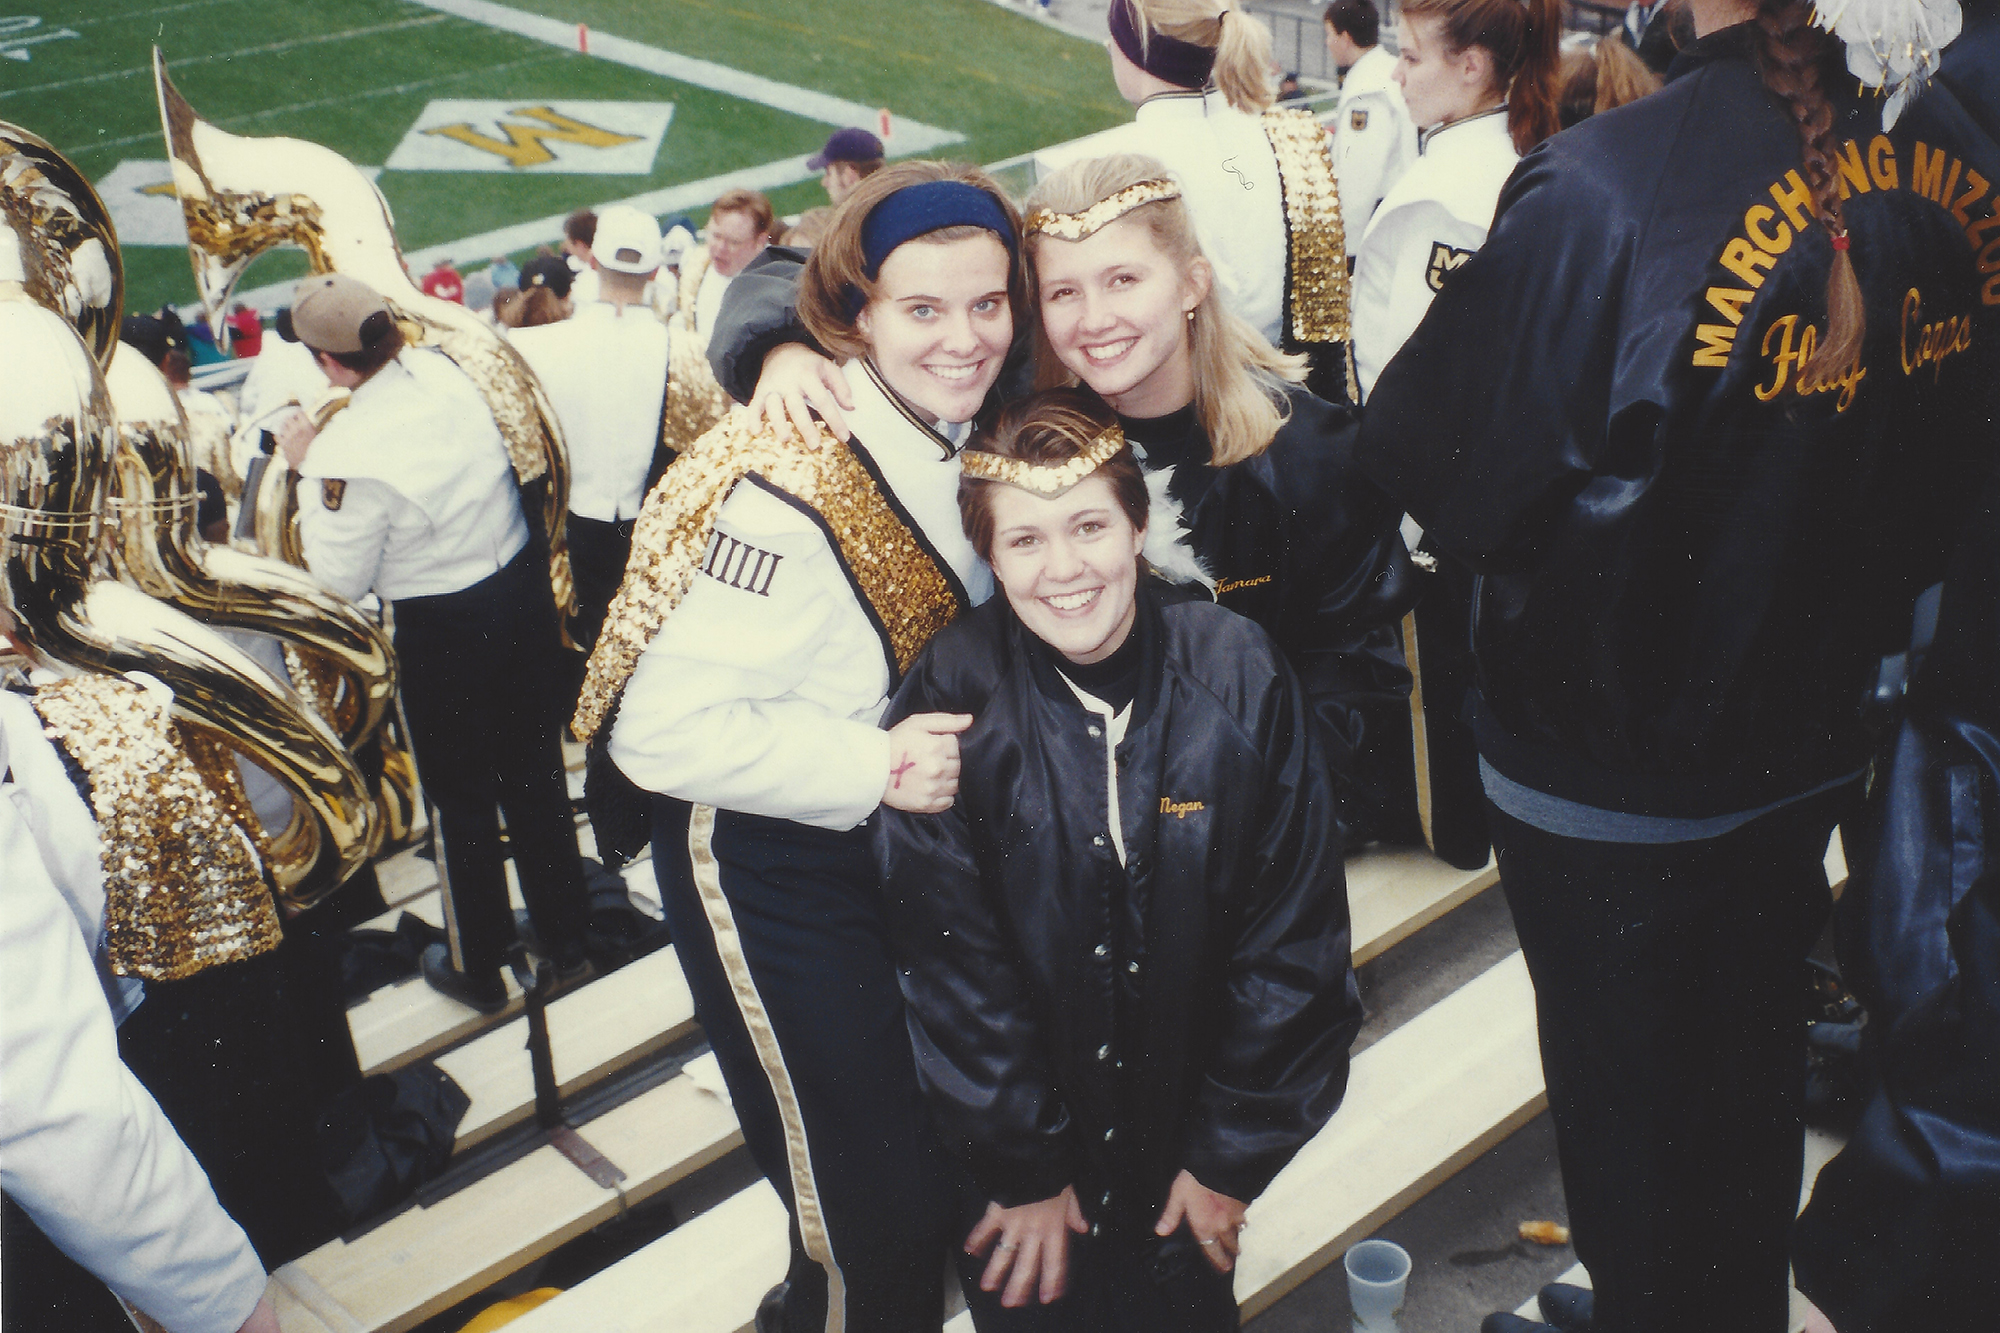 three young women pose for a photo. you can see they're part of marching mizzou and are at a football game